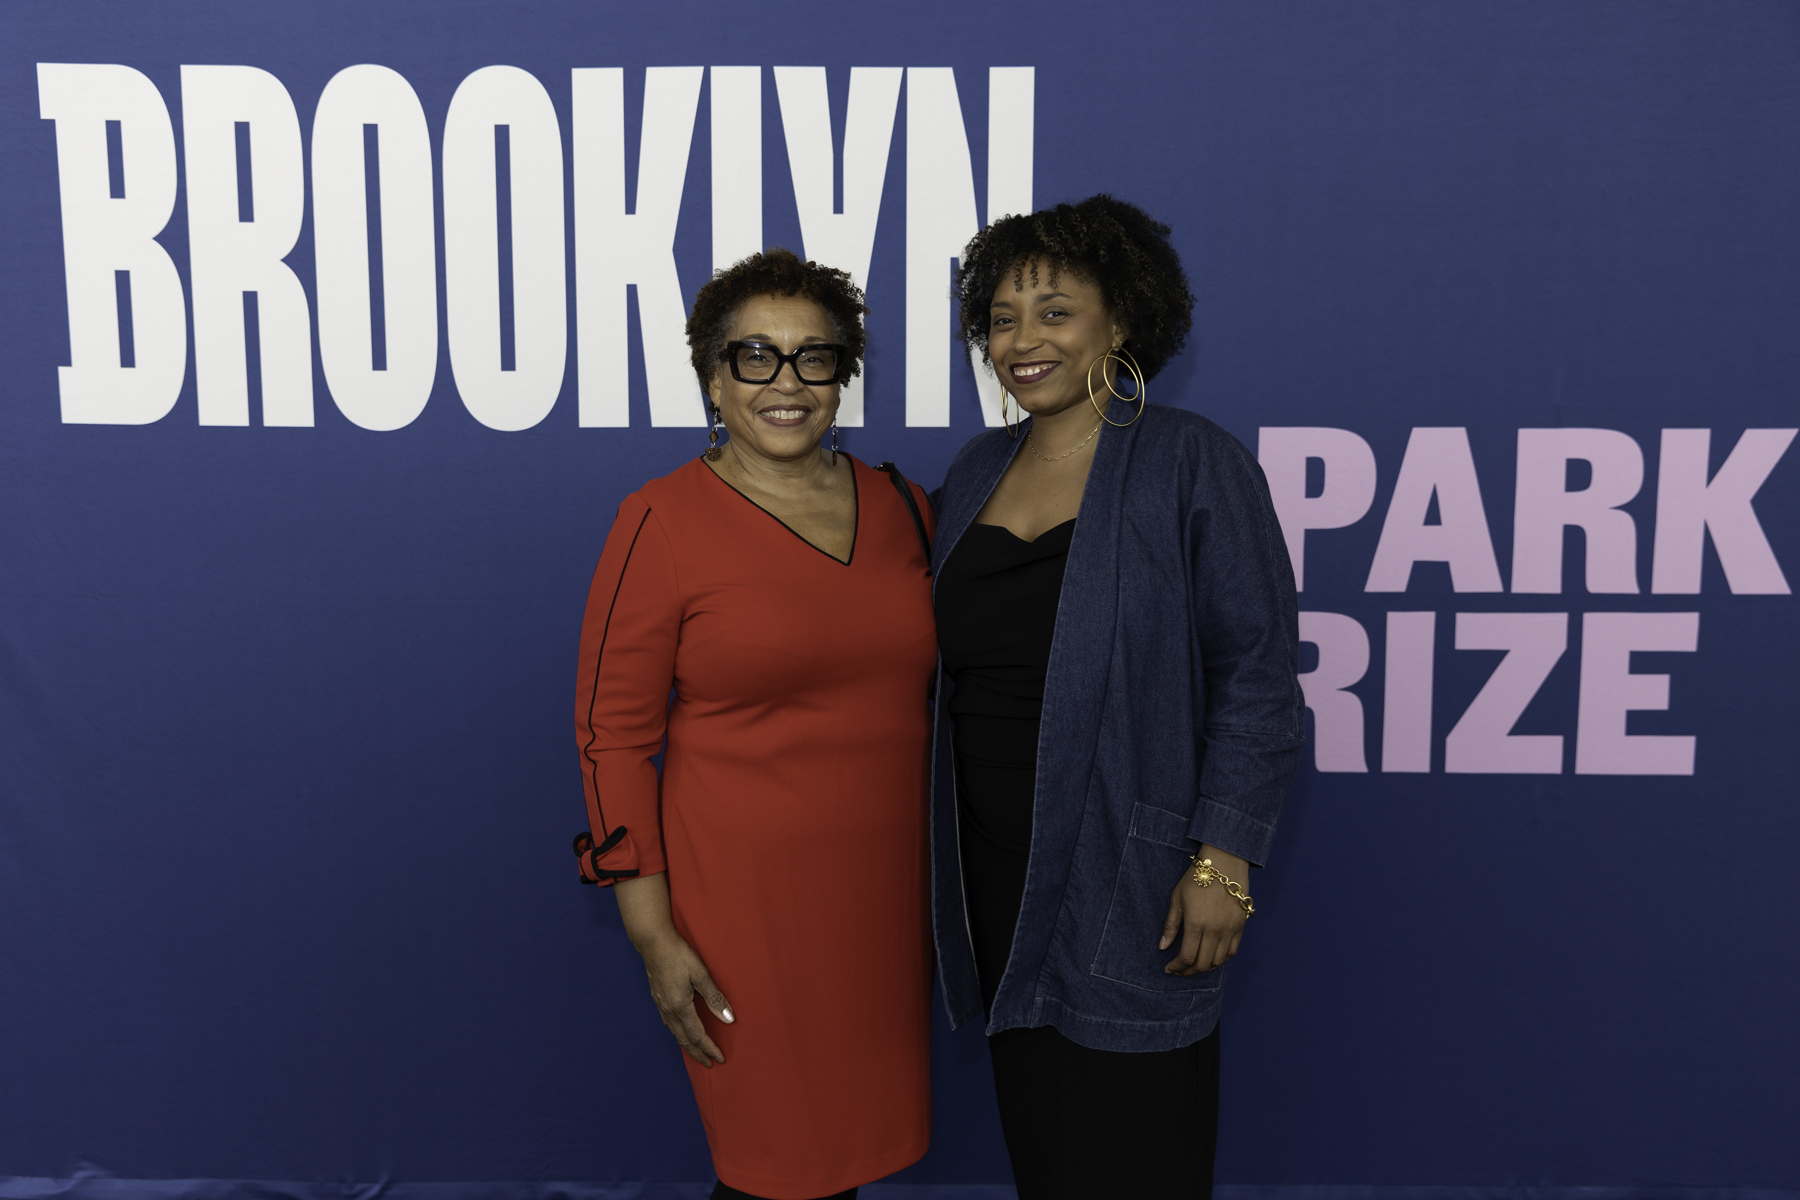 Two women posing together in front of a backdrop with the text "brooklyn park prize.